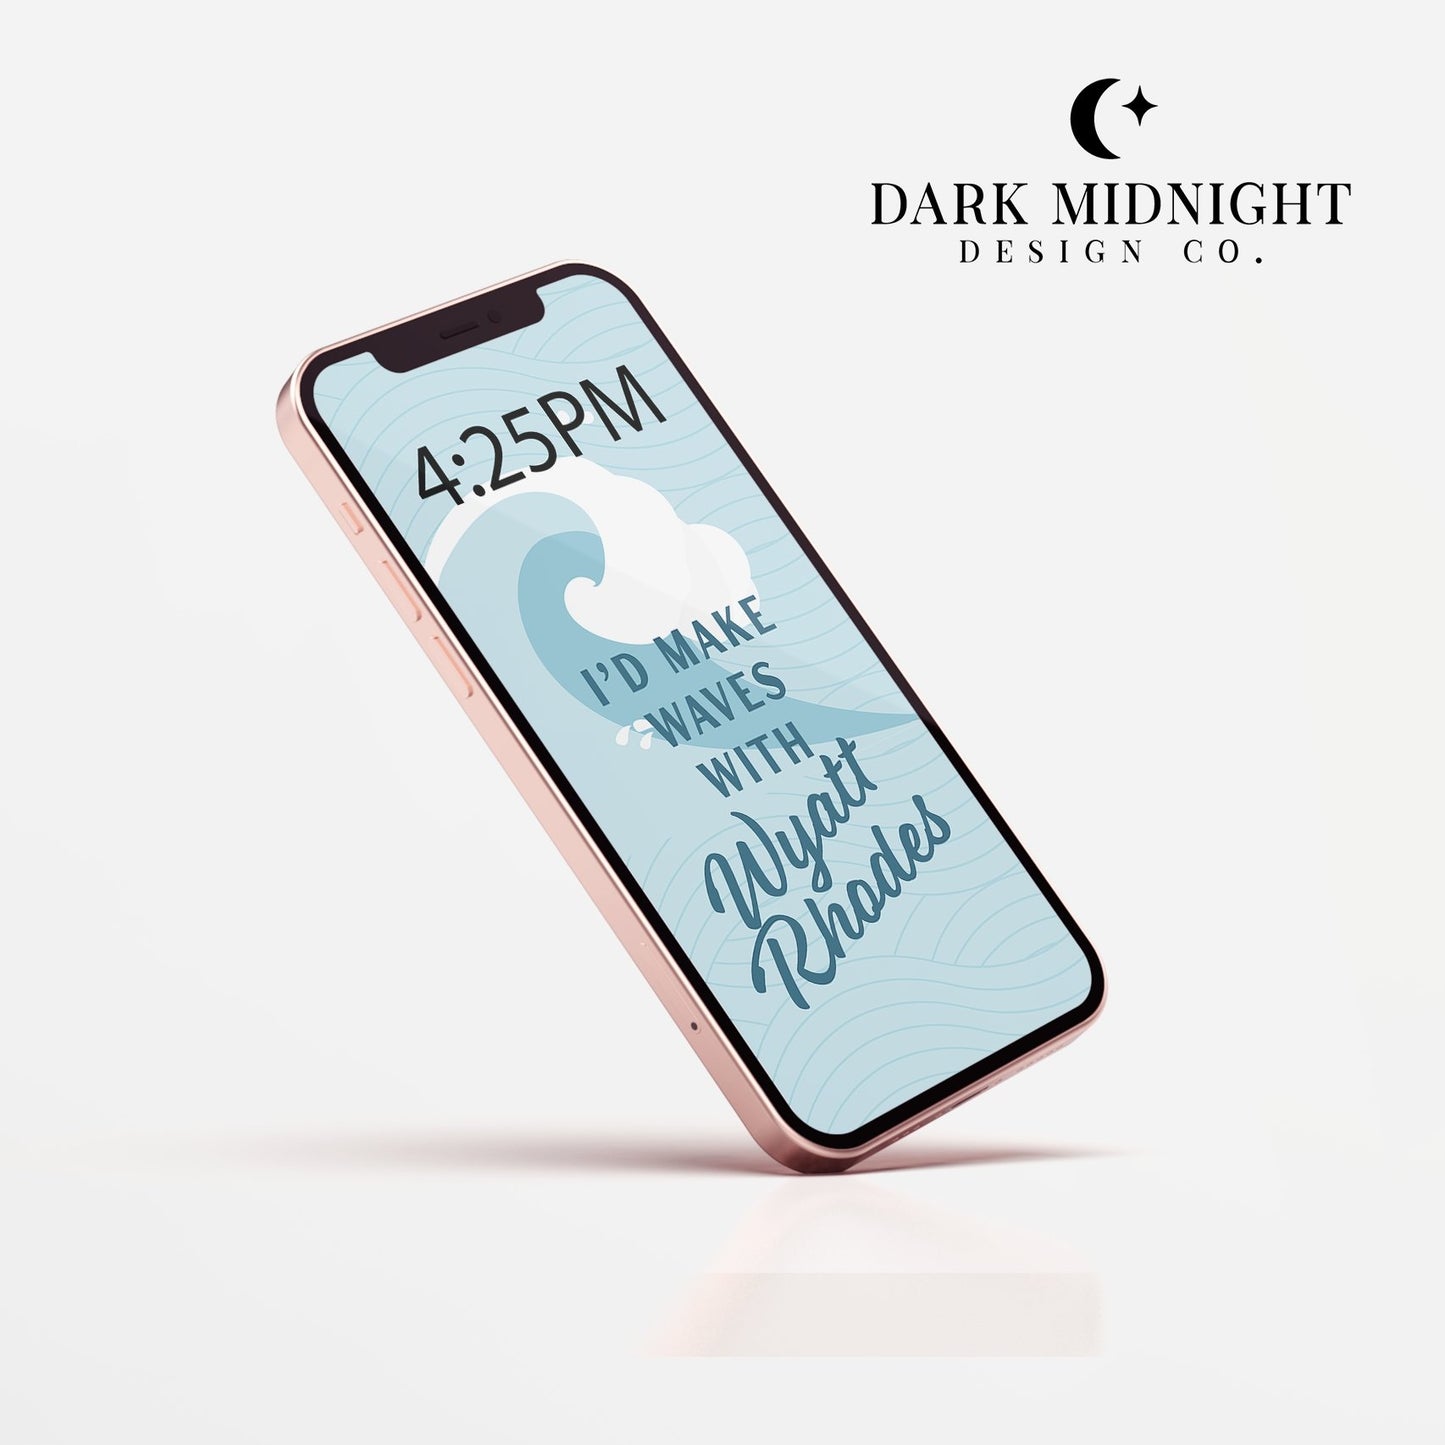 I'd Make Waves With Wyatt Rhodes Phone Wallpaper - Officially Licensed Queen's Cove Series - Dark Midnight Design Co